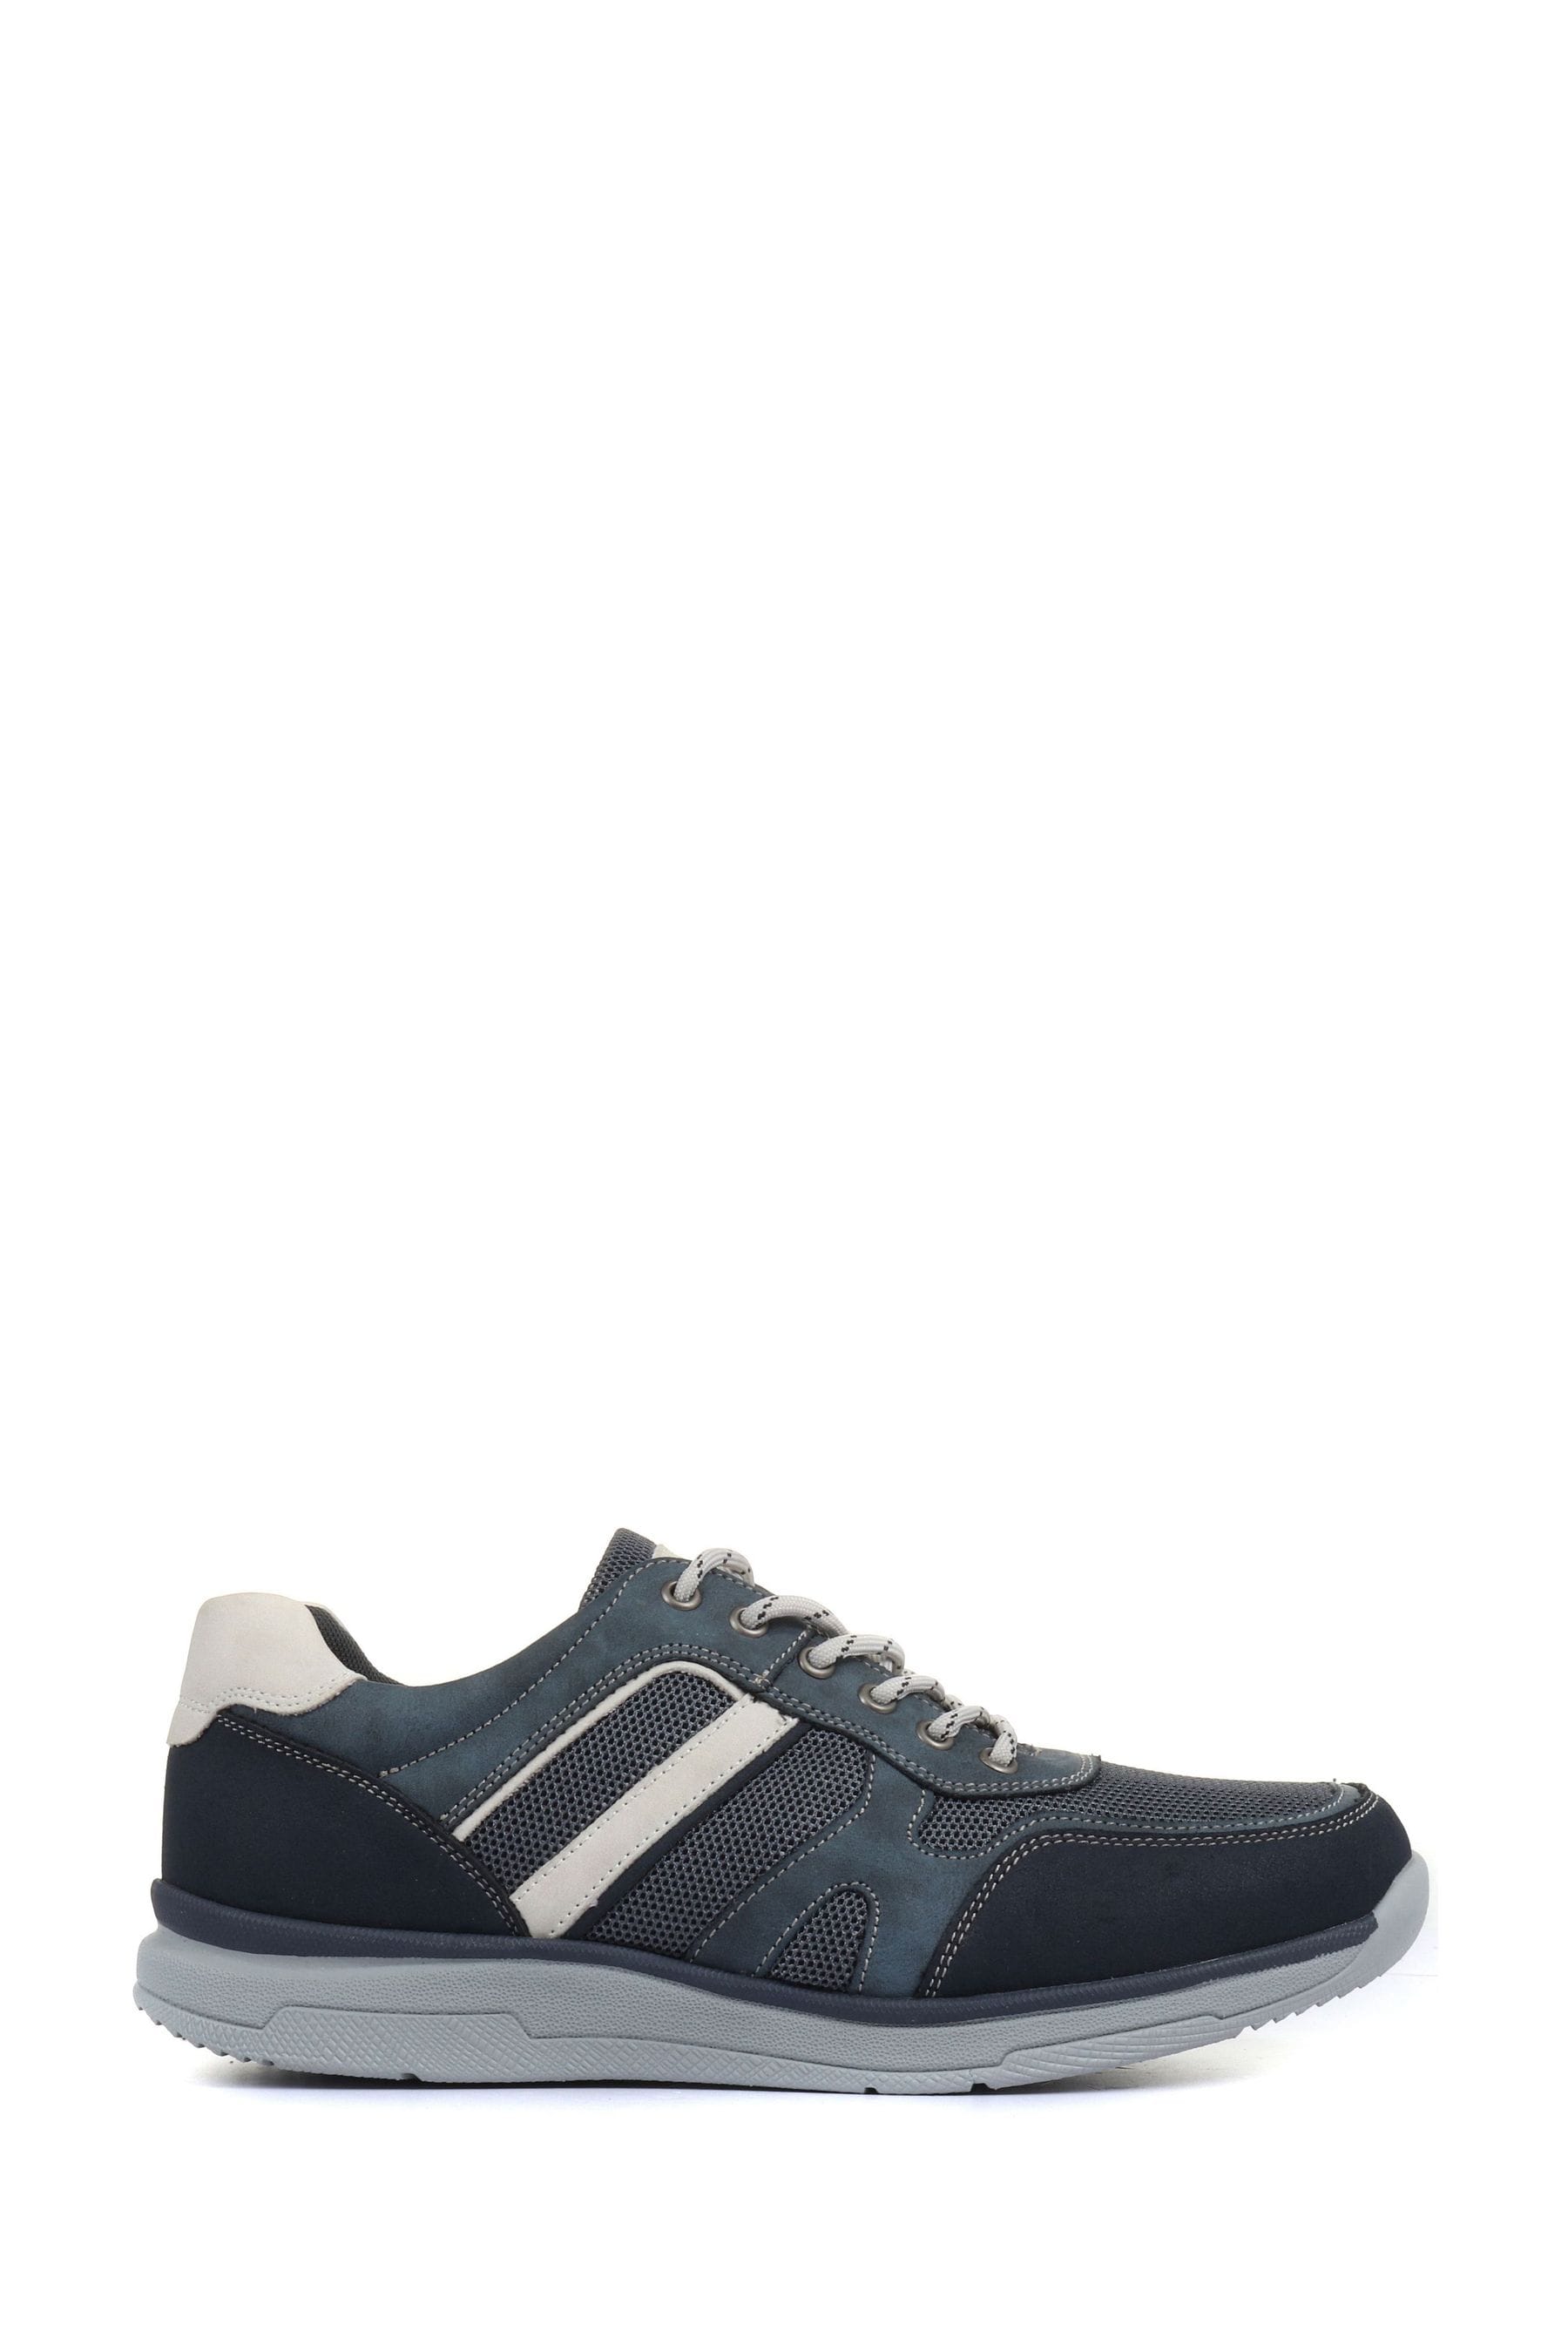 Buy Pavers Blue Mens Wide Fit Trainers from the Next UK online shop